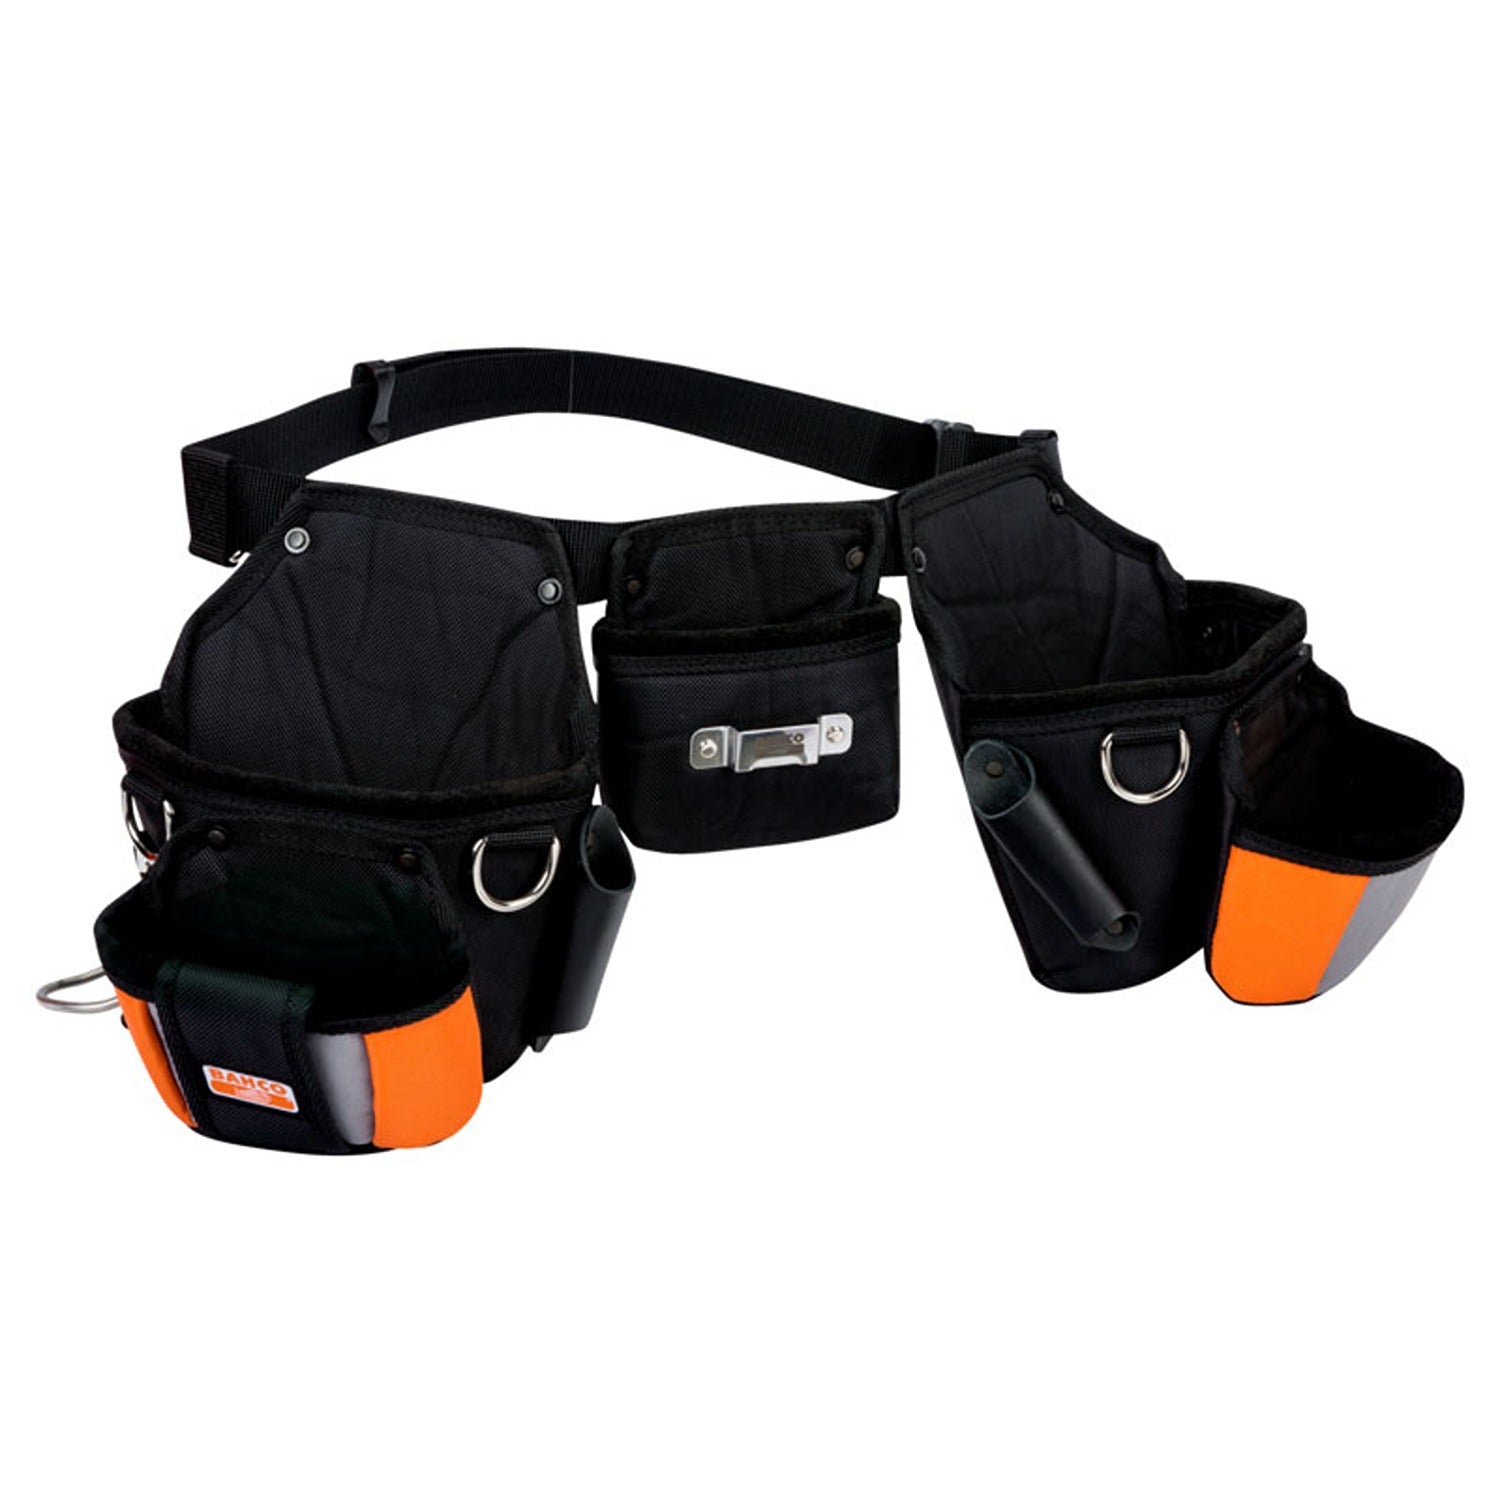 BAHCO 3PB-2 Three Pouch Set Belt with 4 Safety Rings Tool Storage - Premium Tool Storage from BAHCO - Shop now at Yew Aik.